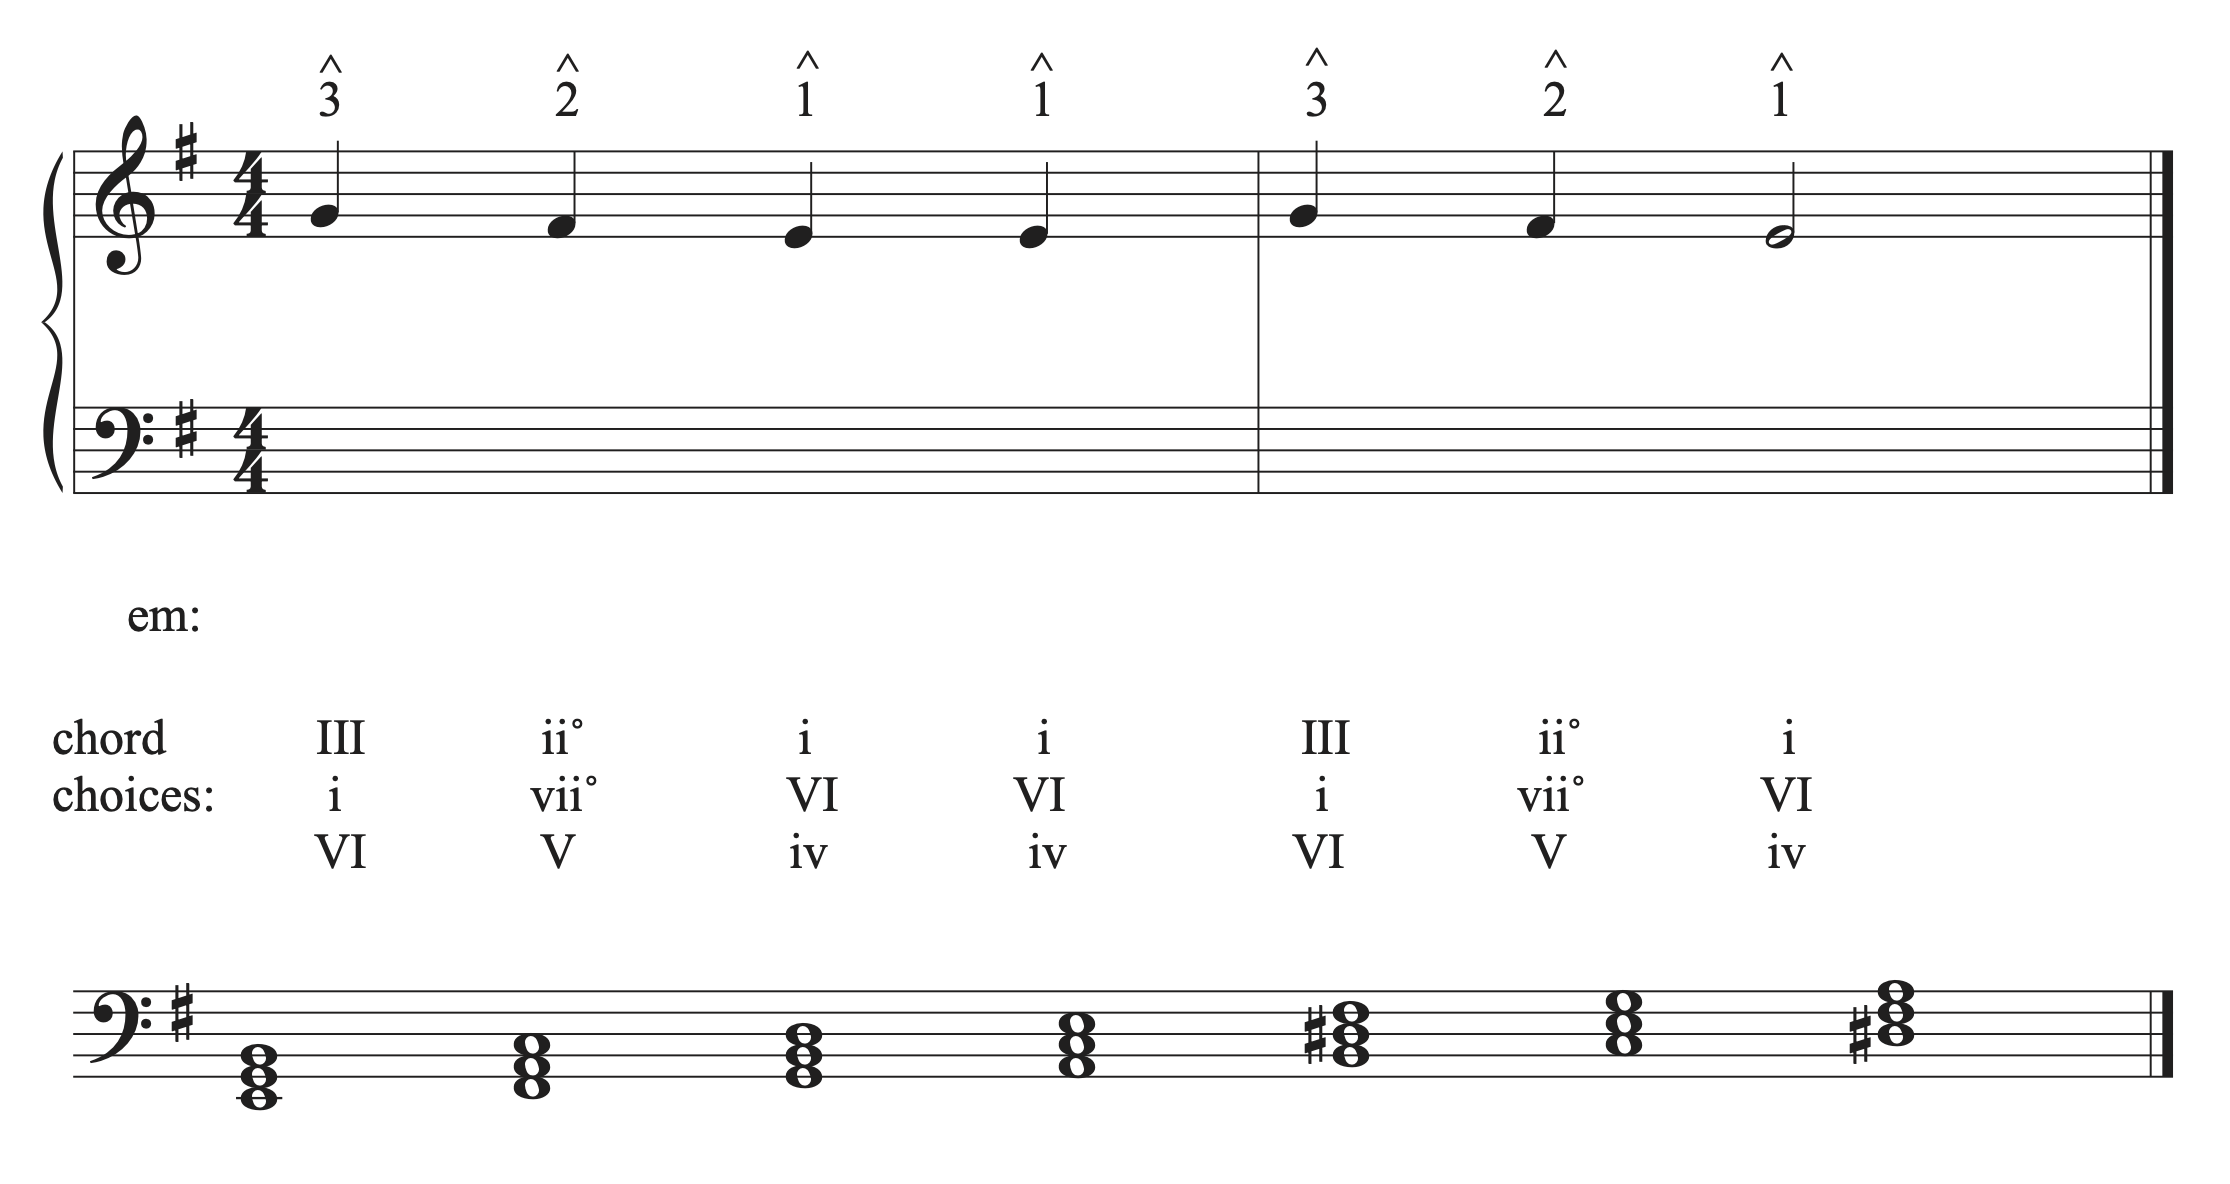 The musical example in G major with a list of chord possibilities for each scale degree in the soprano.